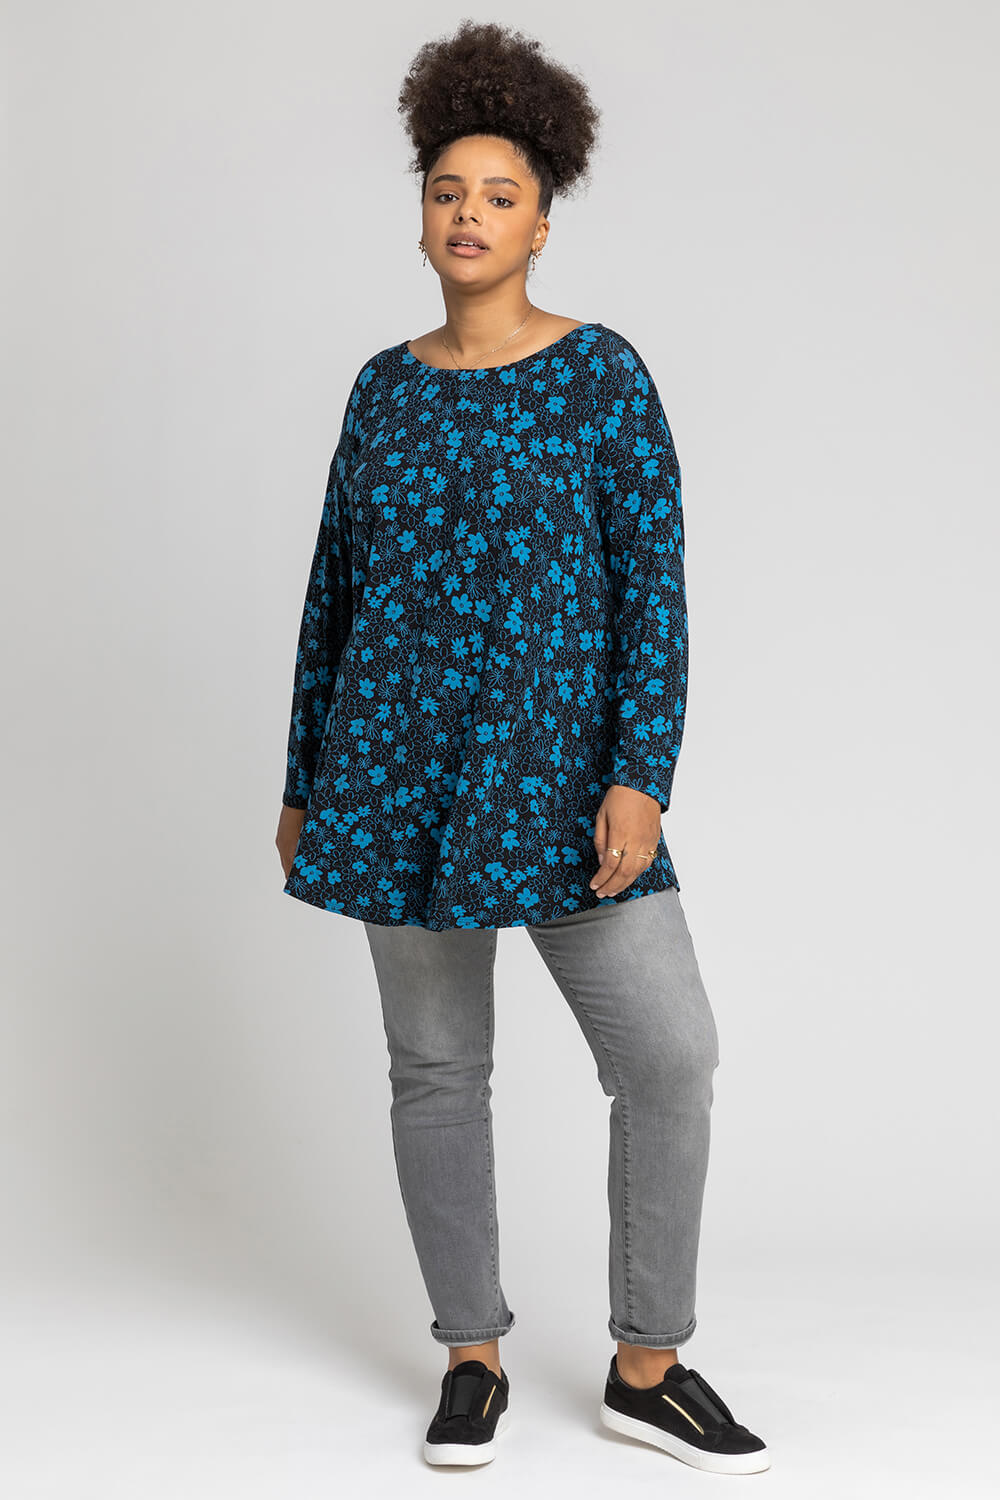 Royal Blue Curve Contrast Floral Print Jersey Top, Image 3 of 4